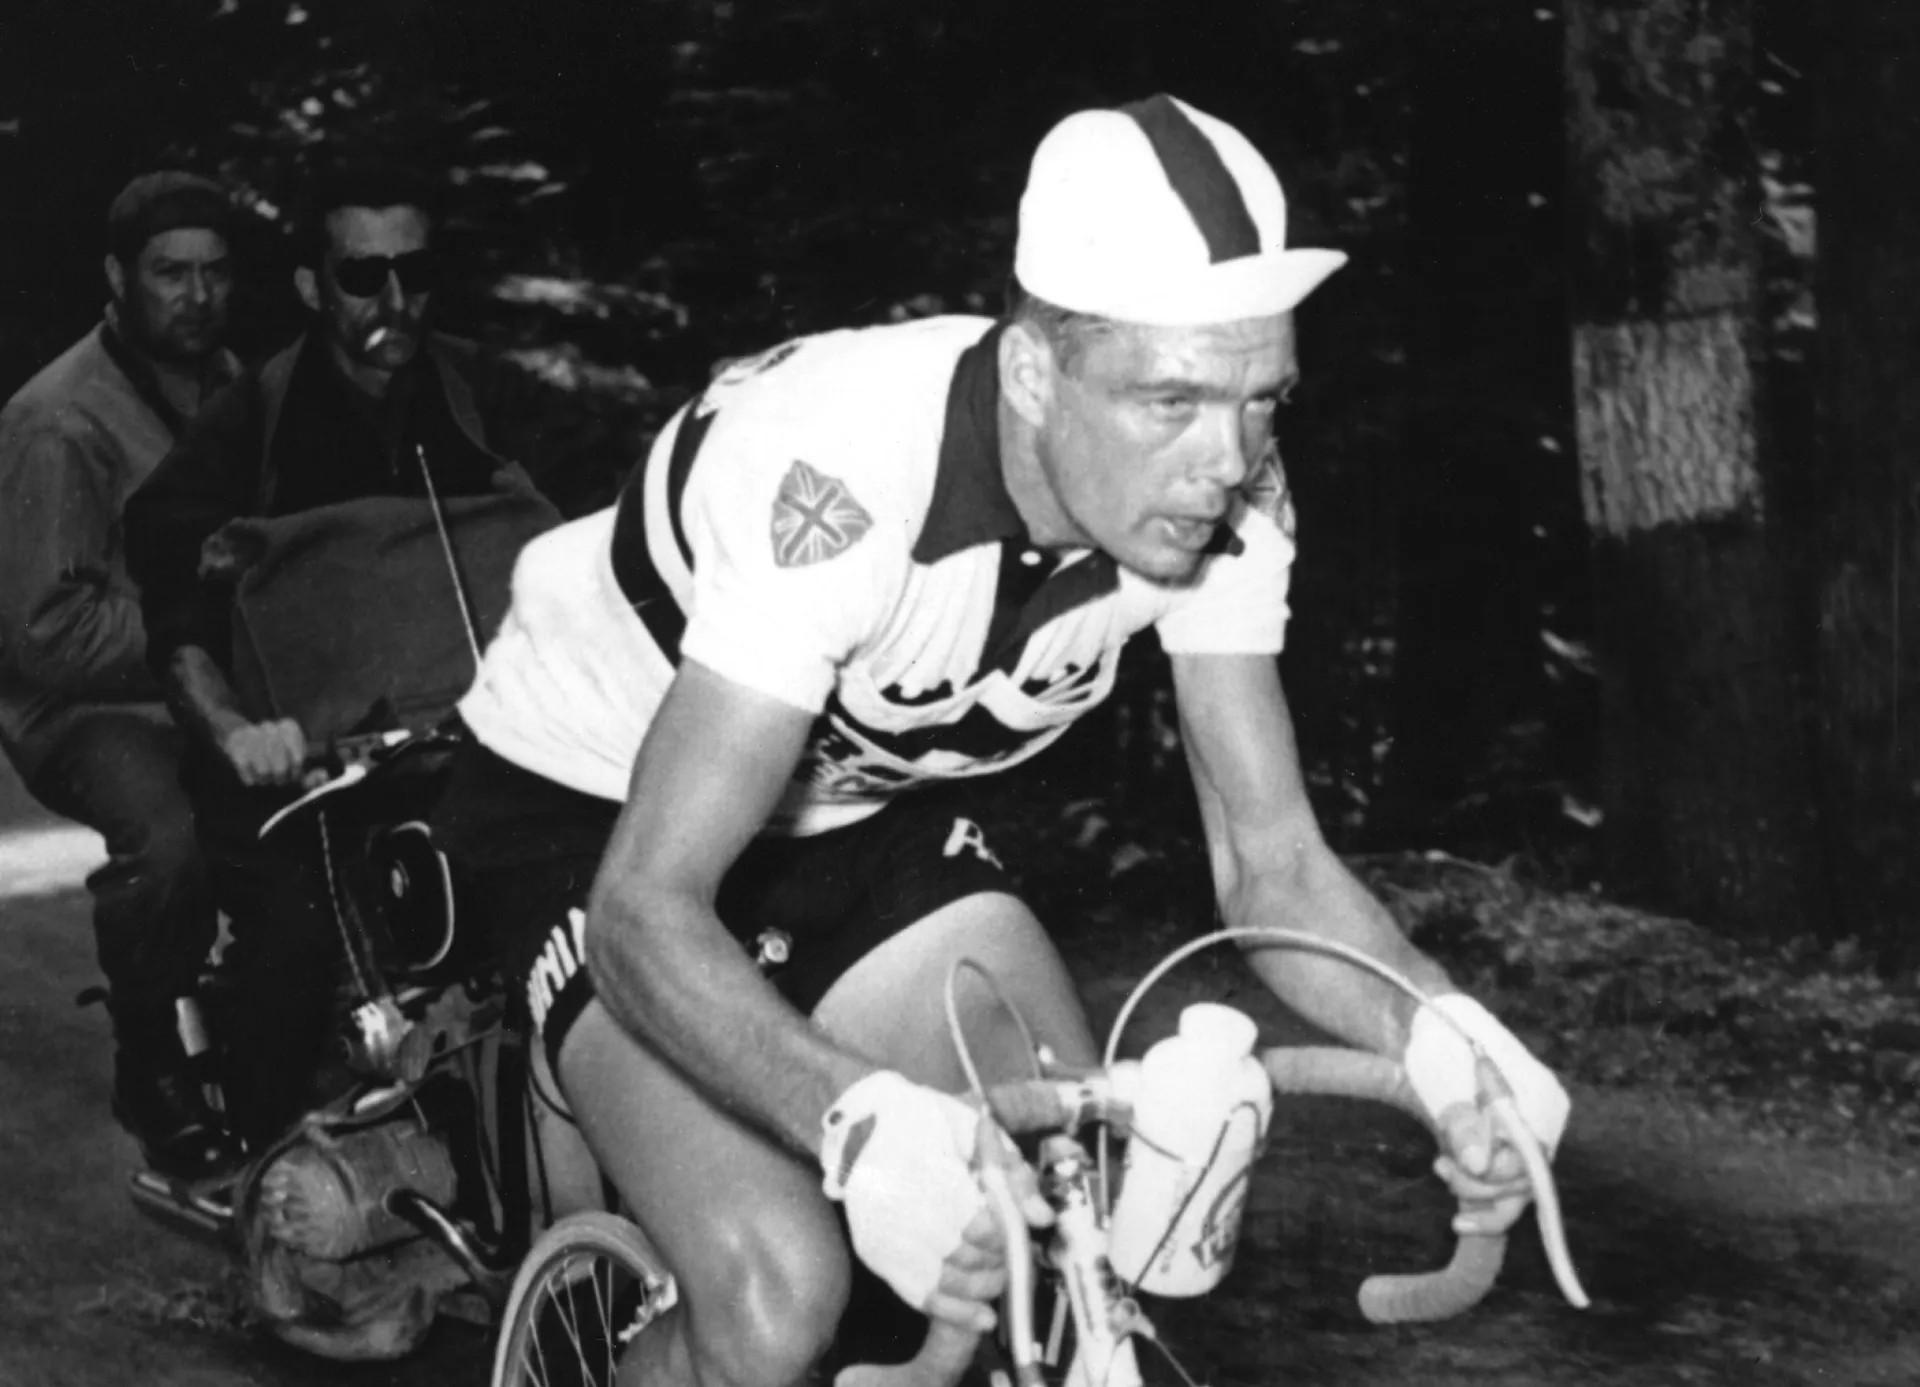 The legacy of Brian Robinson, Britain’s first Tour de France stage winner